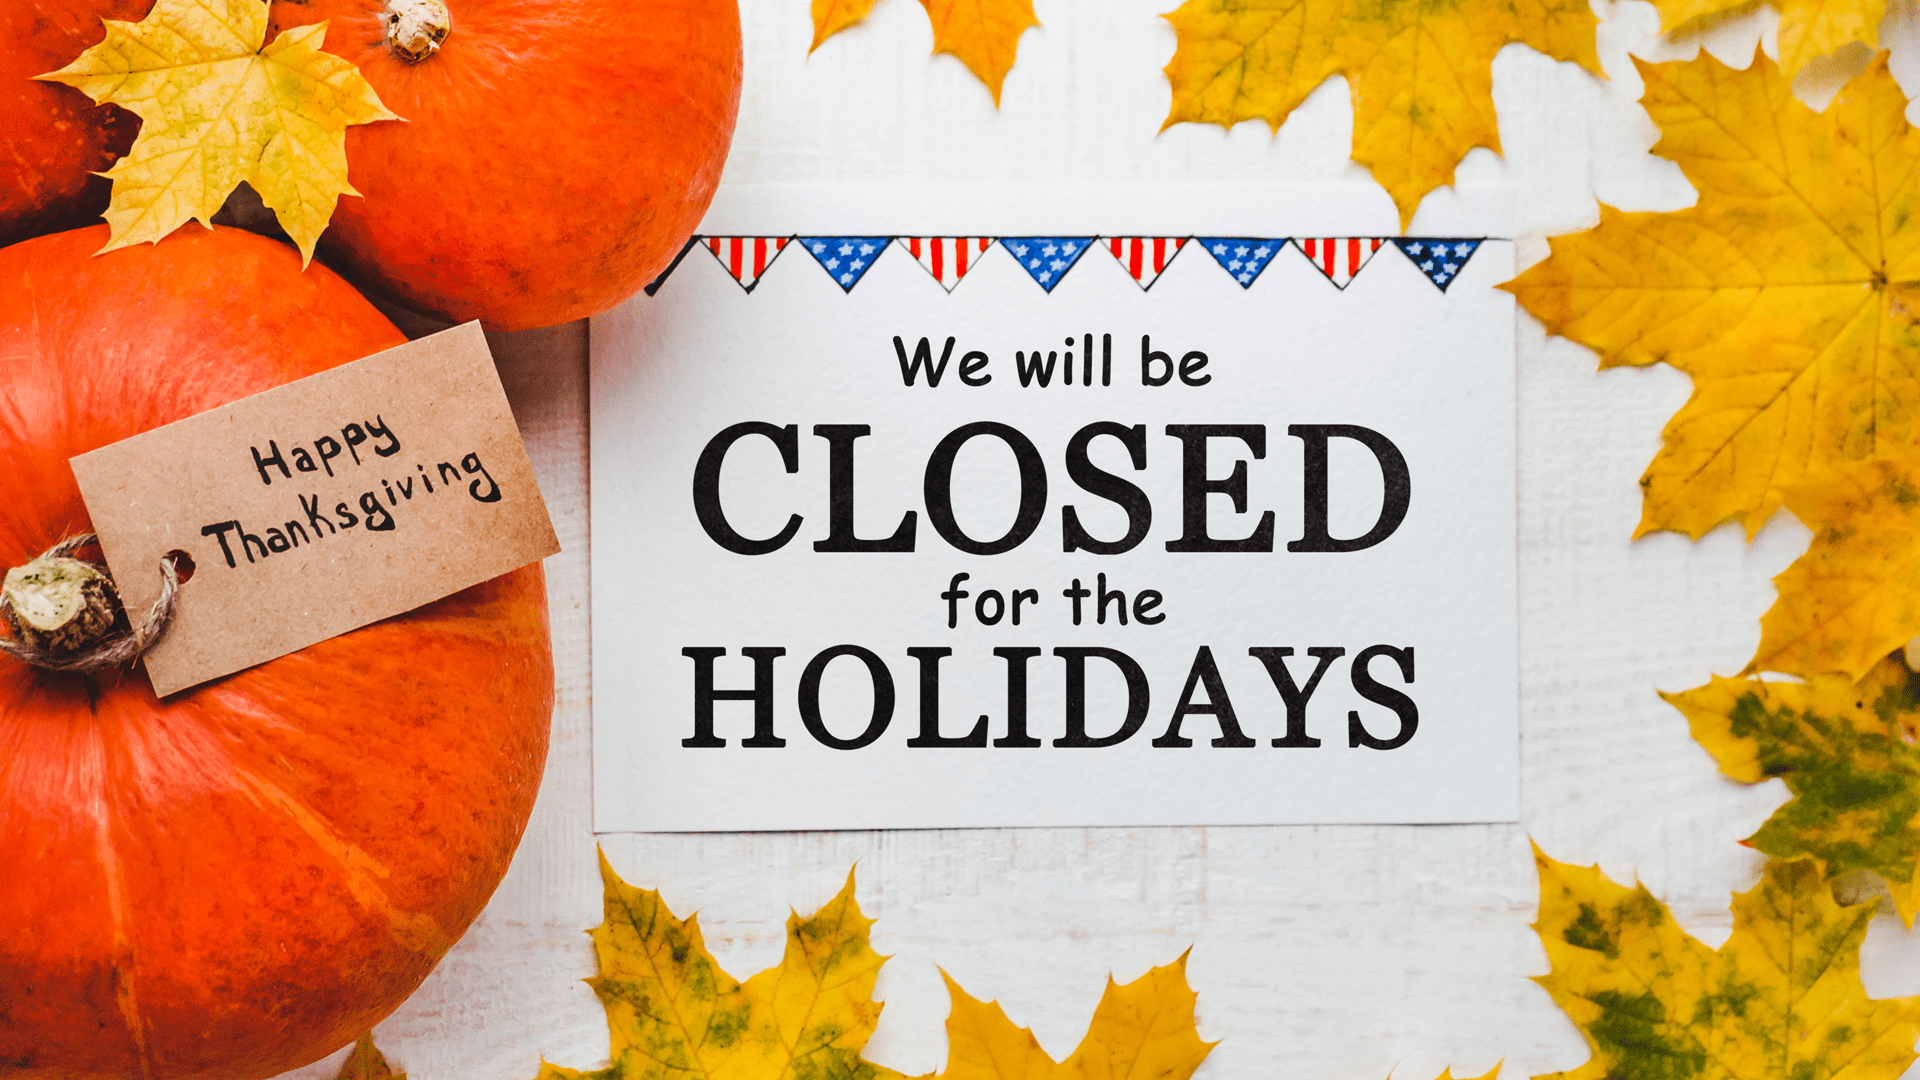 NRTC's offices are closed on 11/24 and 11/25 in observance of Thanksgiving